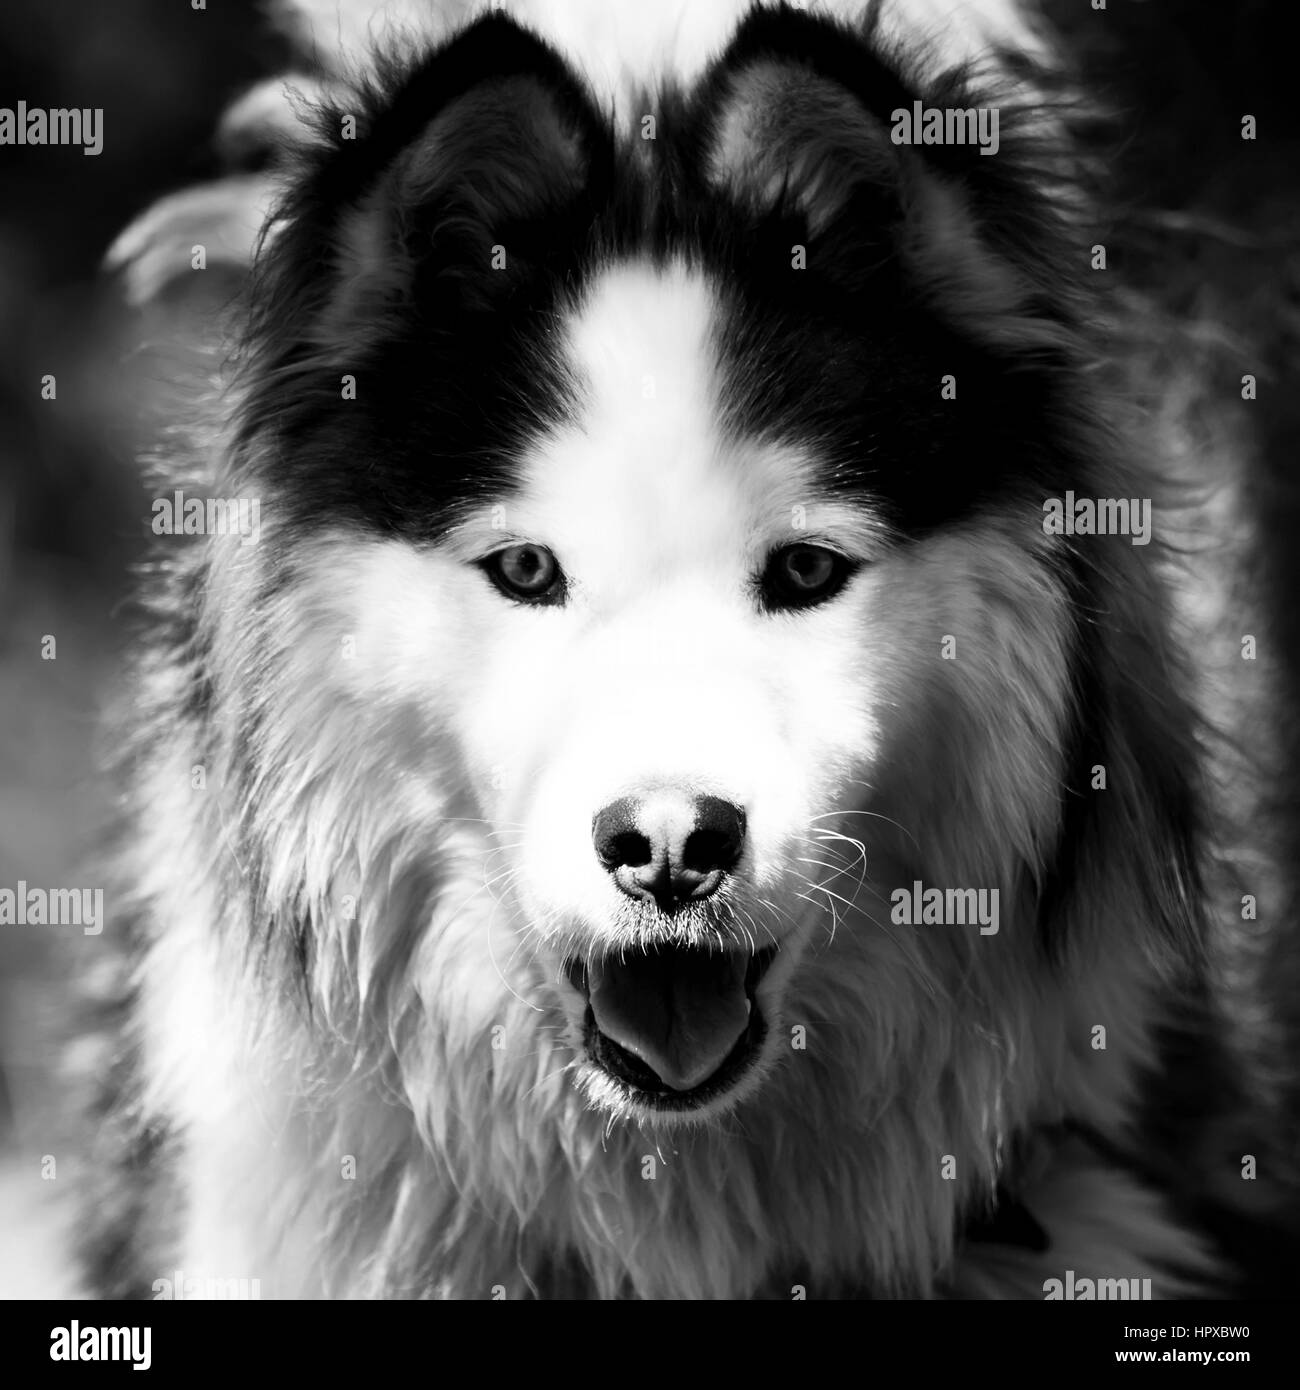 Abstract black and white close-up dog portrait, malamute dog in the forest Stock Photo